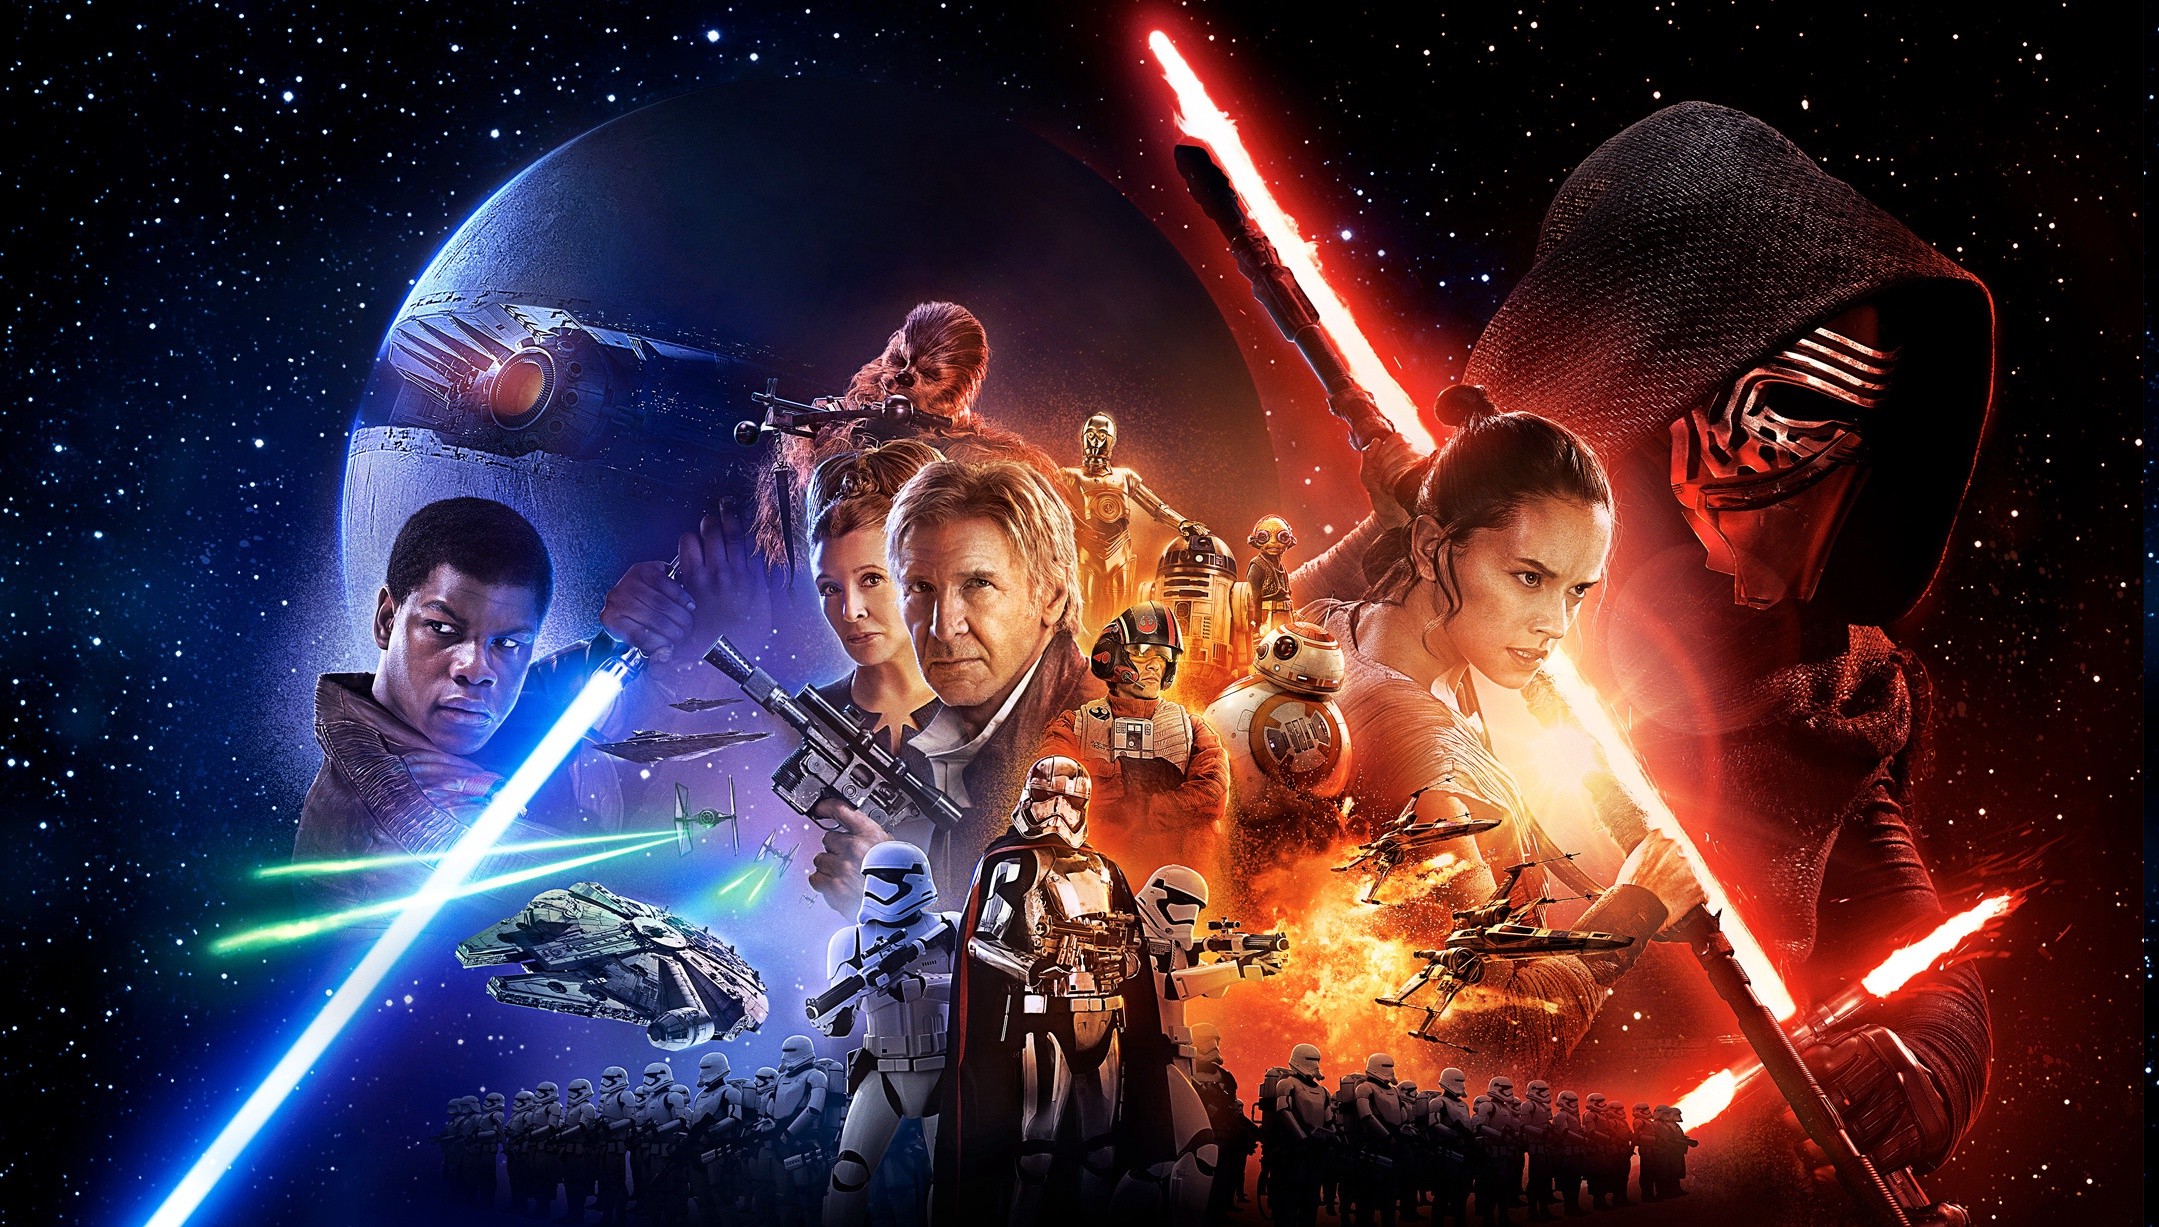 Star Wars Ep. VII: The Force Awakens download the last version for windows